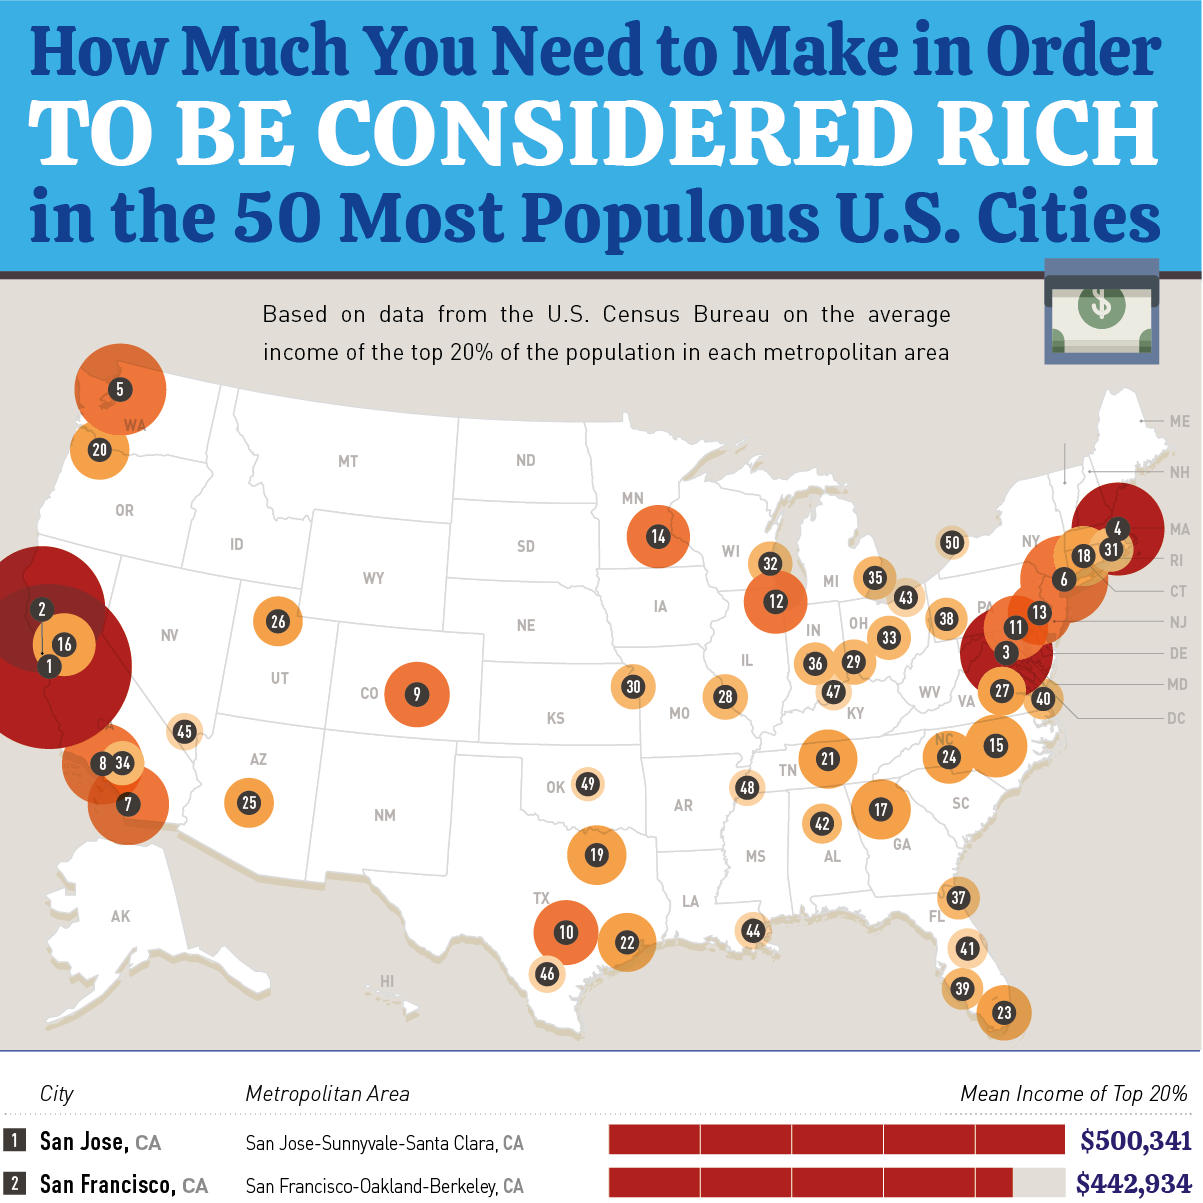 How Much You Need to Make in Order to Be Considered Rich in the 50 Most